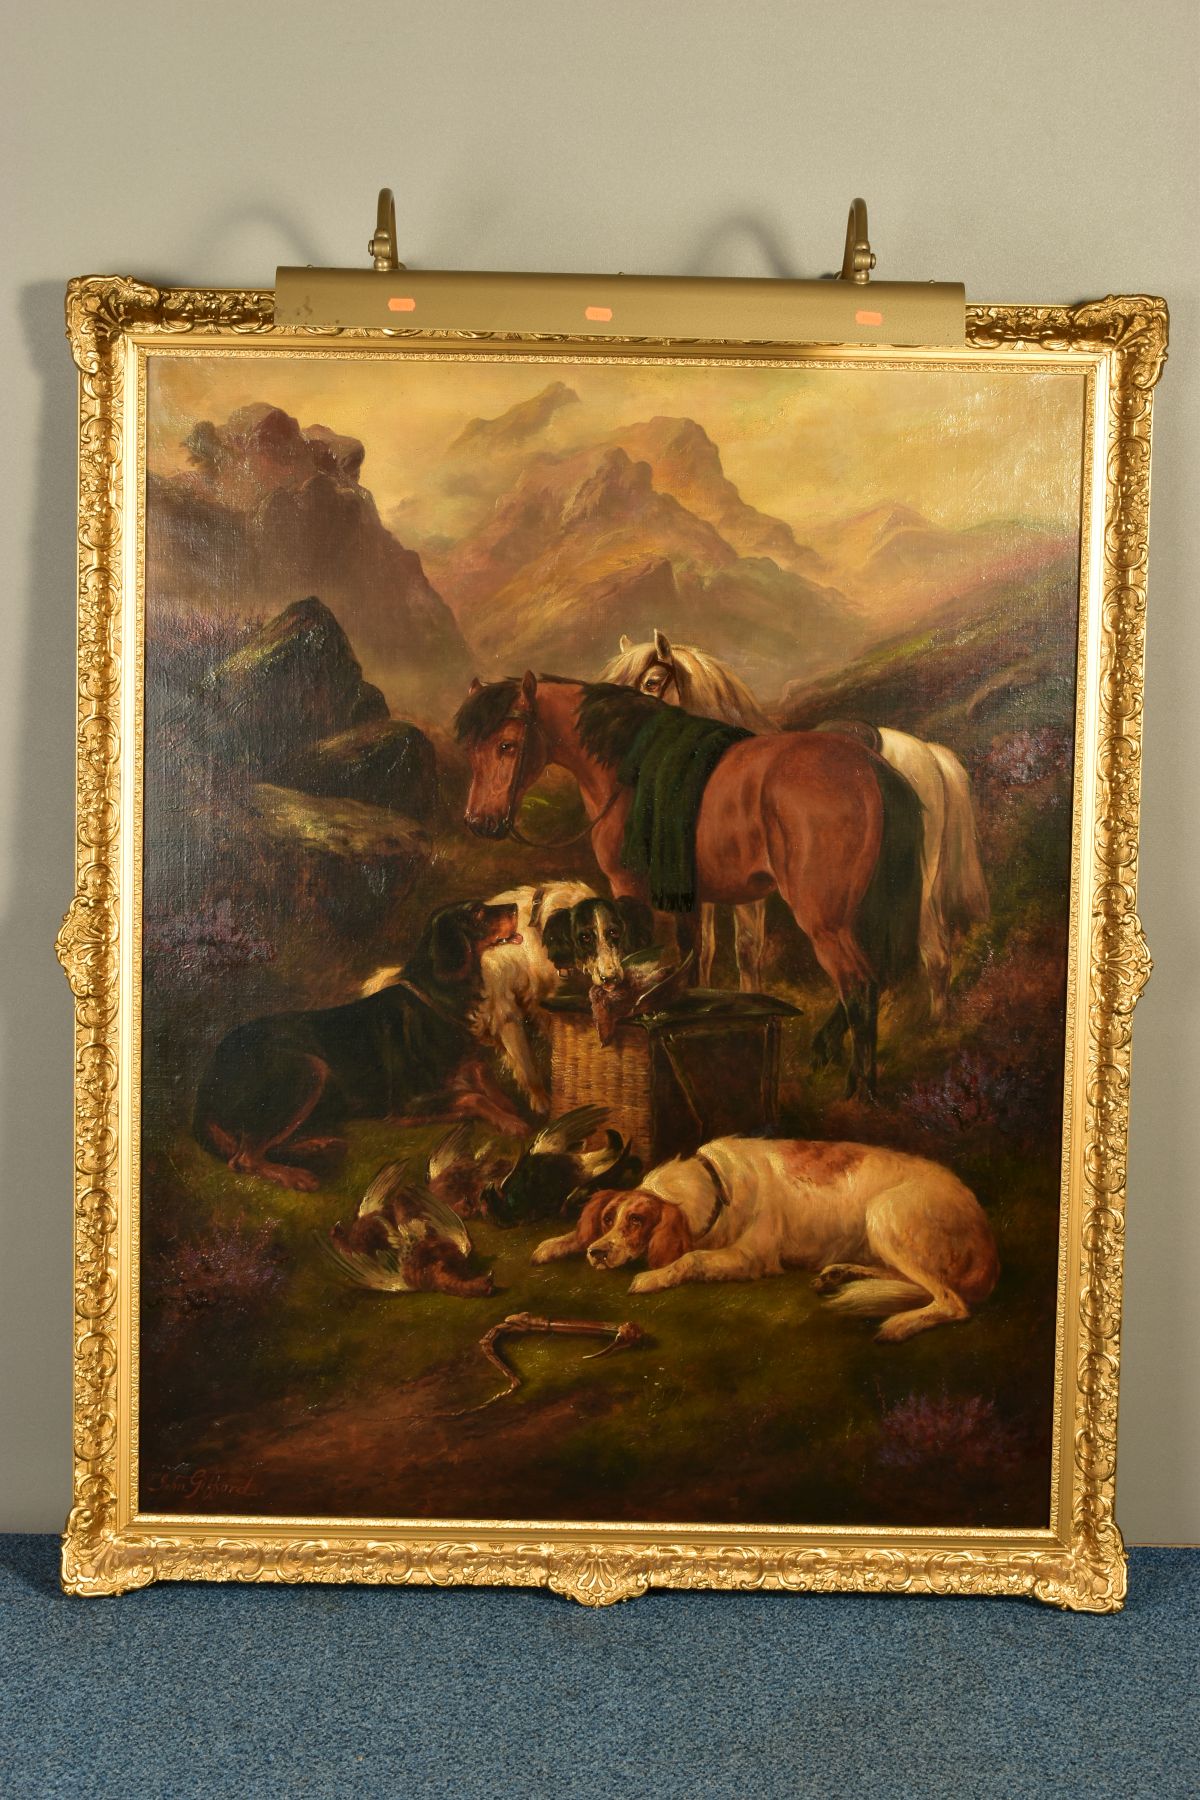 JOHN GIFFORD (19TH CENTURY), HUNTING DOGS AND HORSES AT REST WITHIN A MOUNTAINOUS LANDSCAPE,